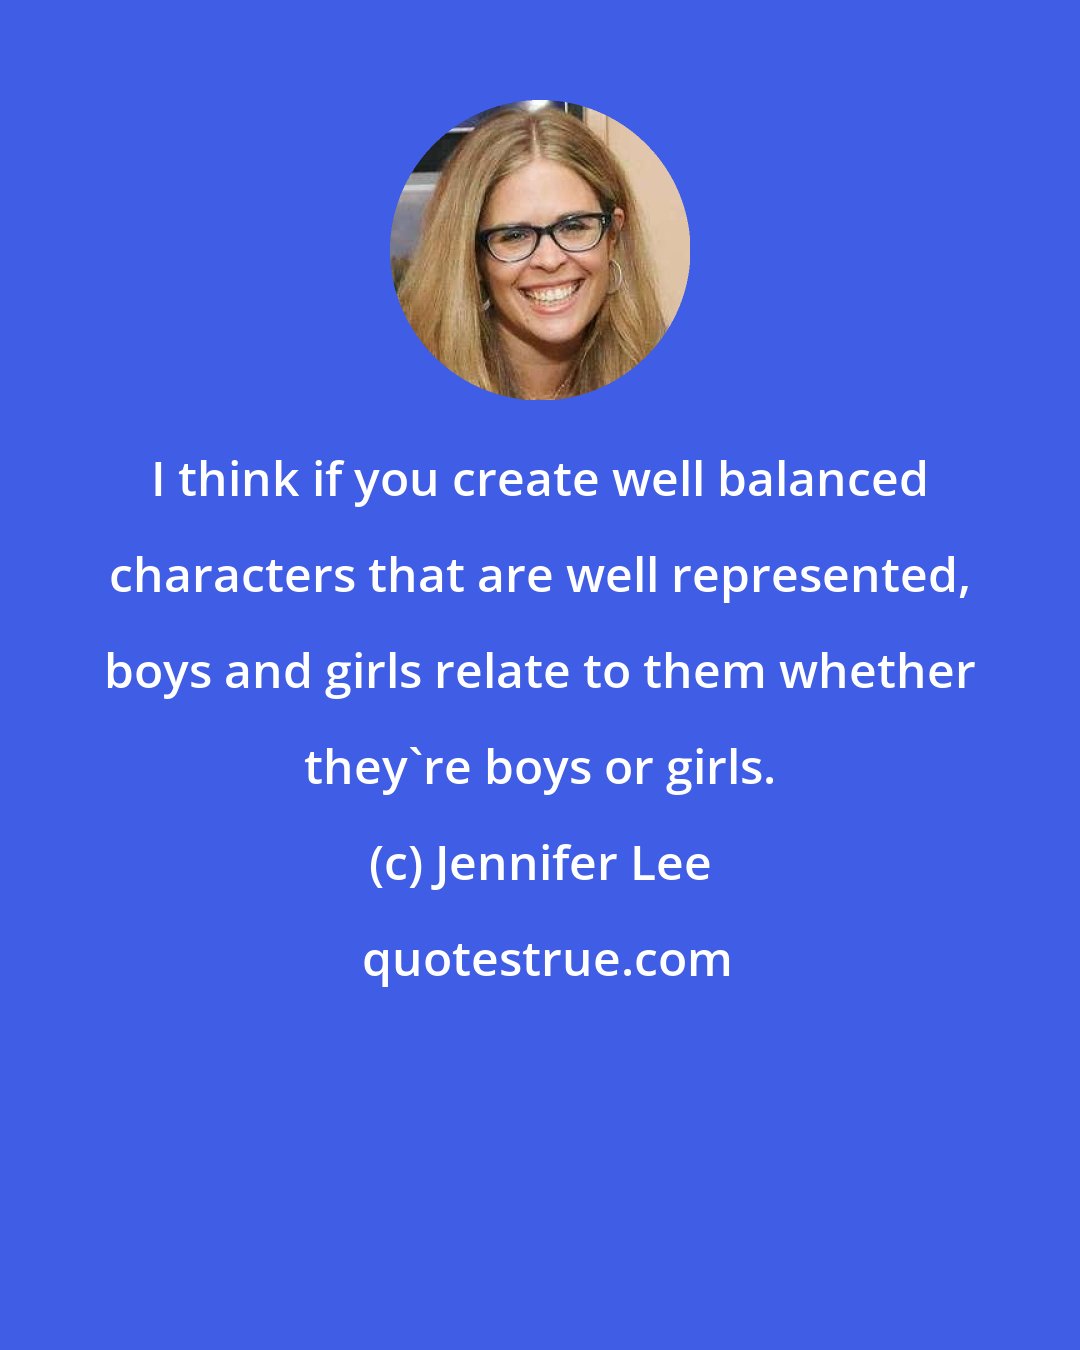 Jennifer Lee: I think if you create well balanced characters that are well represented, boys and girls relate to them whether they're boys or girls.